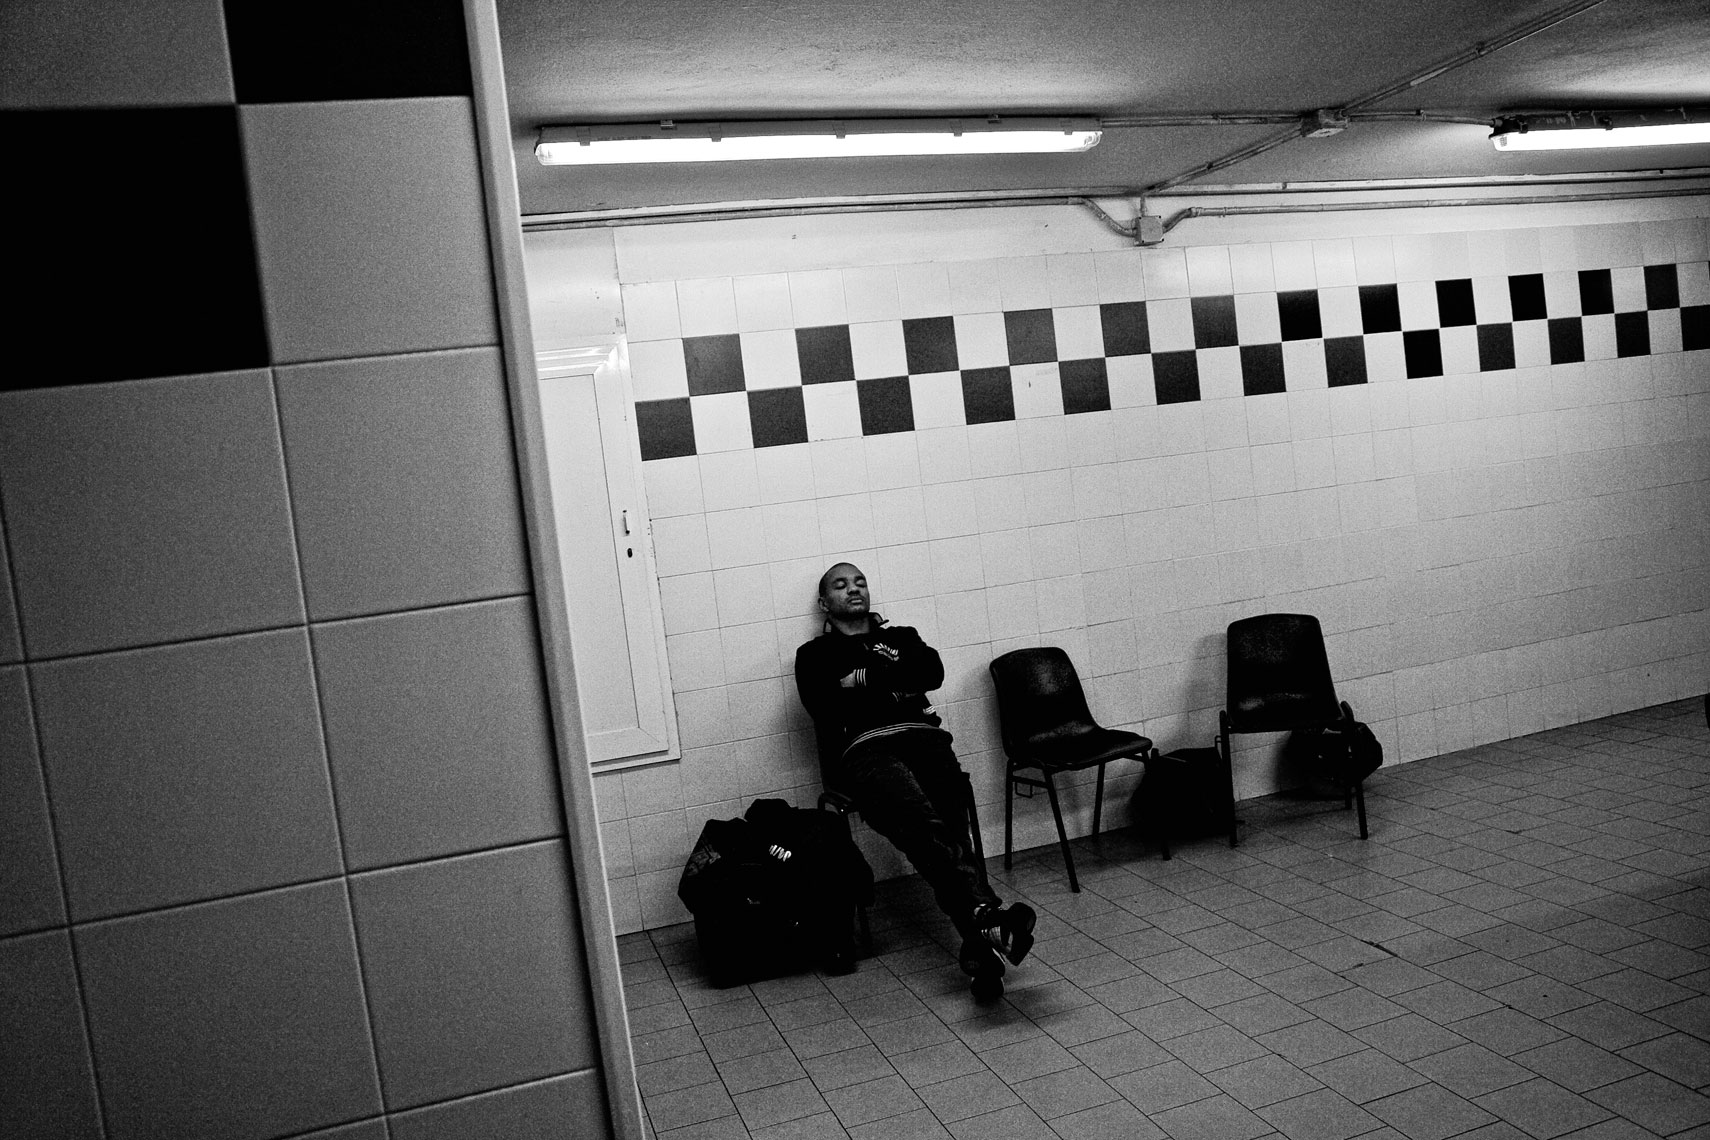 ITALY. Florence, 4th November 2011. Mandela Forum, the night of the match for the EBU (European Boxing Union) Welter Weight crown, Leonard Bundu inside the locker room triyng to find right concetration to face the match.